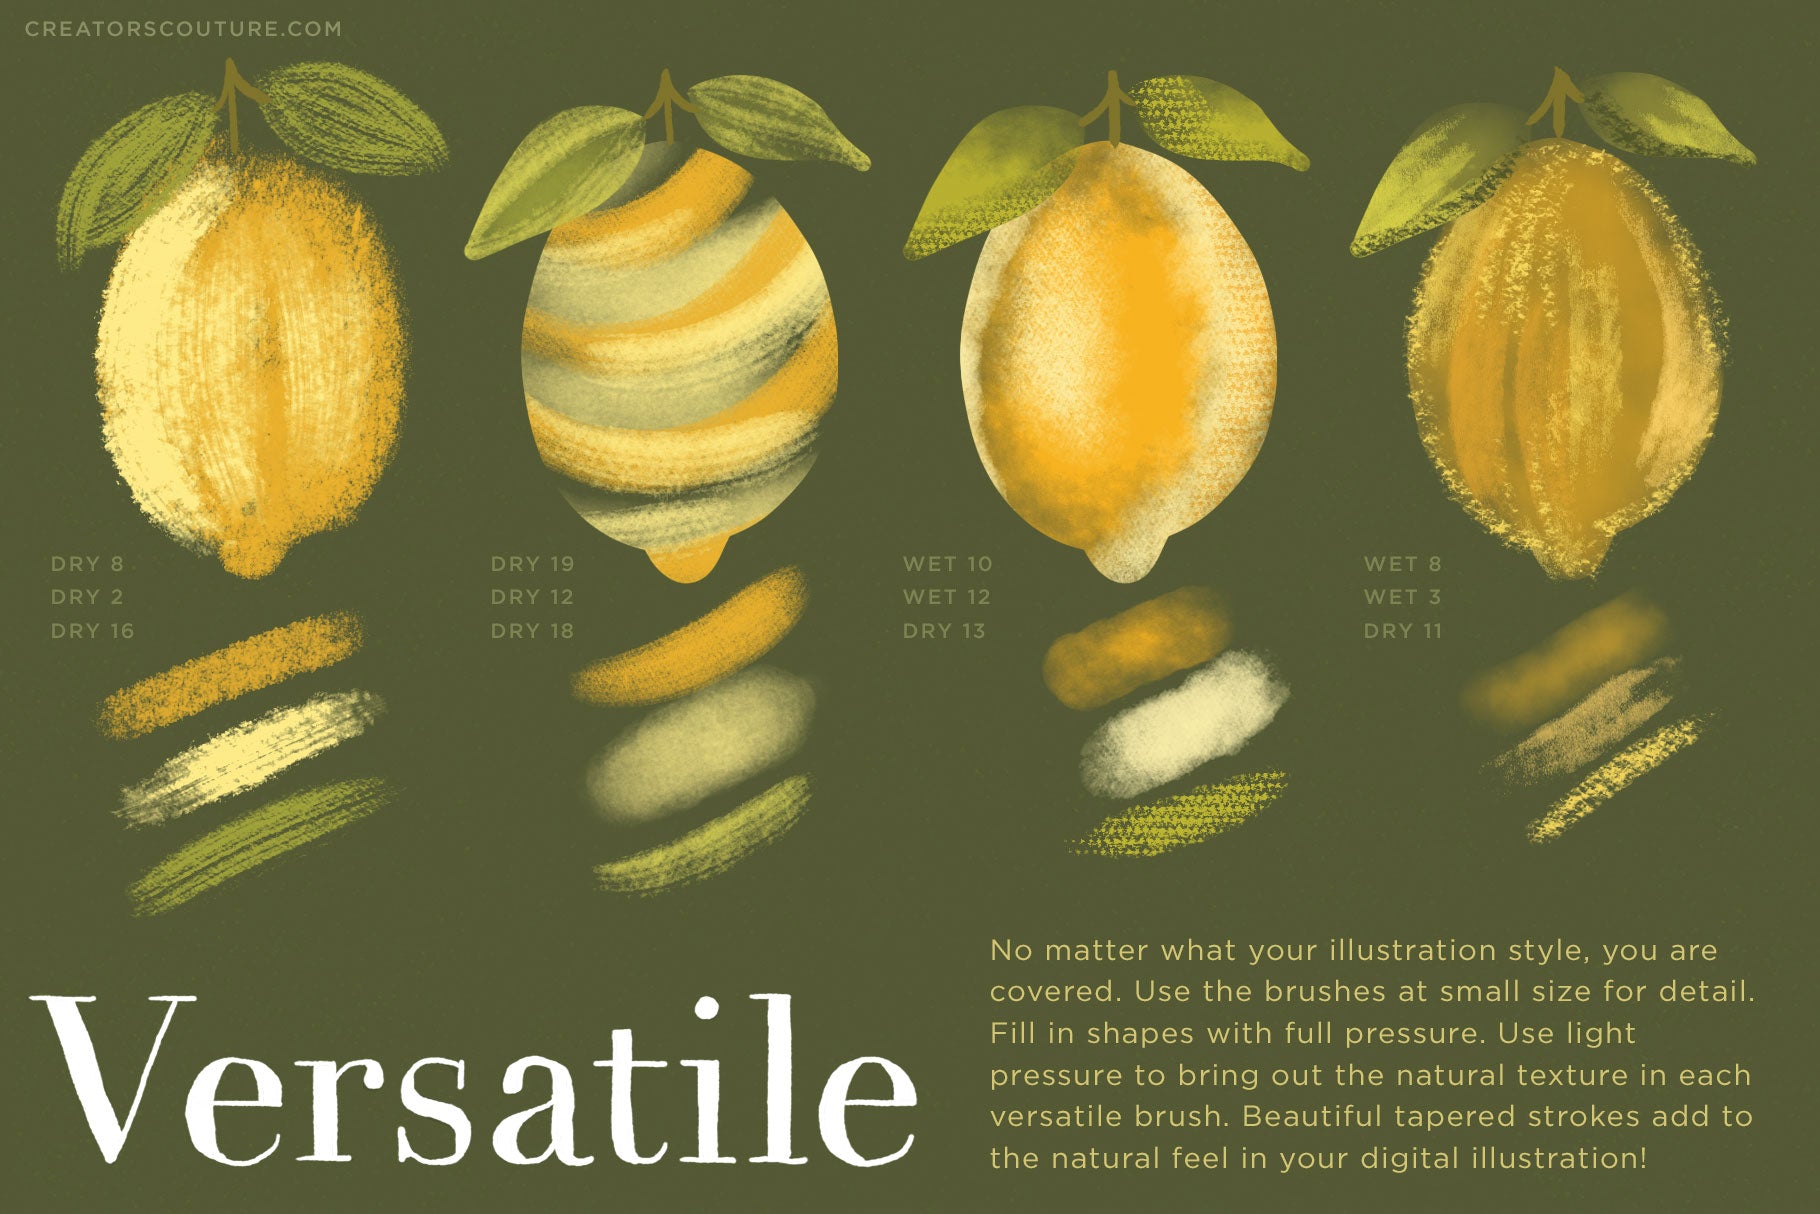 natural media photoshop brushes, realistic texture, pencils, pastels, charcoal, inks, gouache & watercolor, demo images of a lemon illustration drawn 4 different ways with various brushes